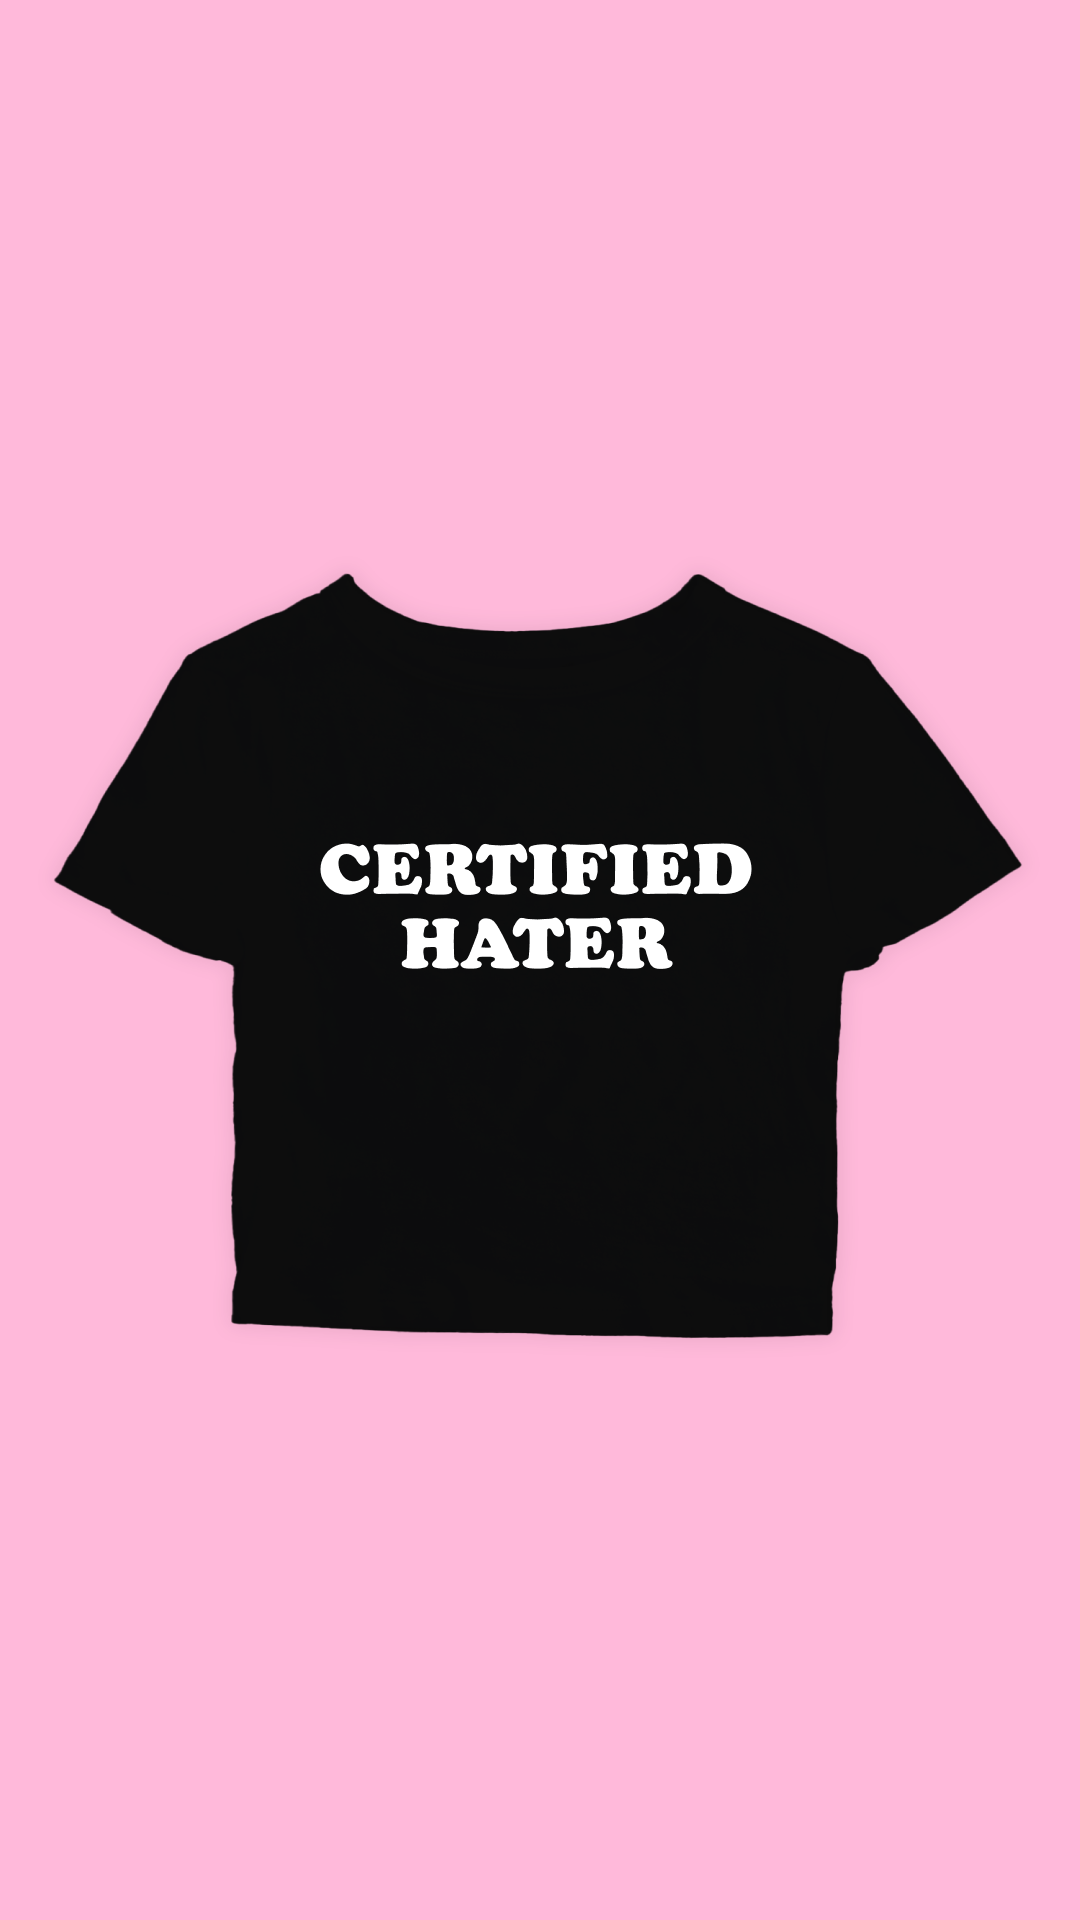 CERTIFIED HATER